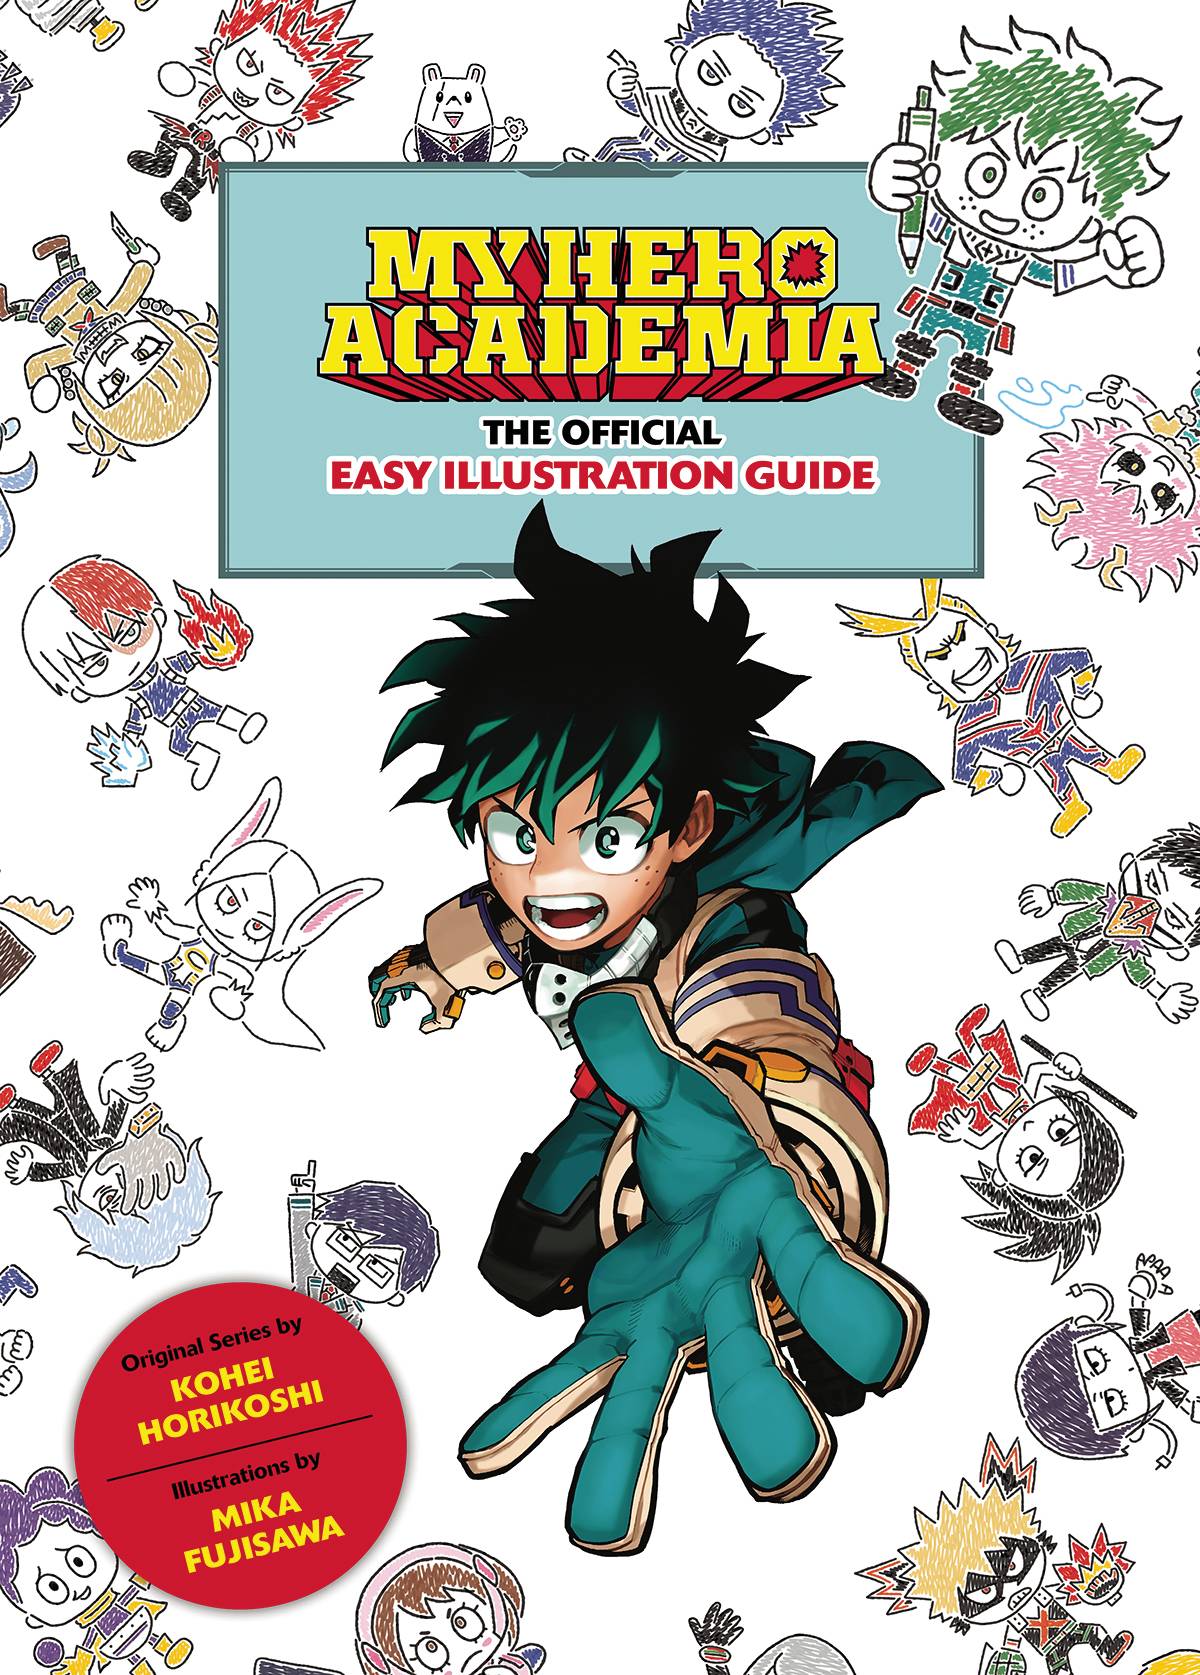 MY HERO ACADEMIA OFFICIAL EASY ILLUSTRATION GUIDE TP (C: 0-1